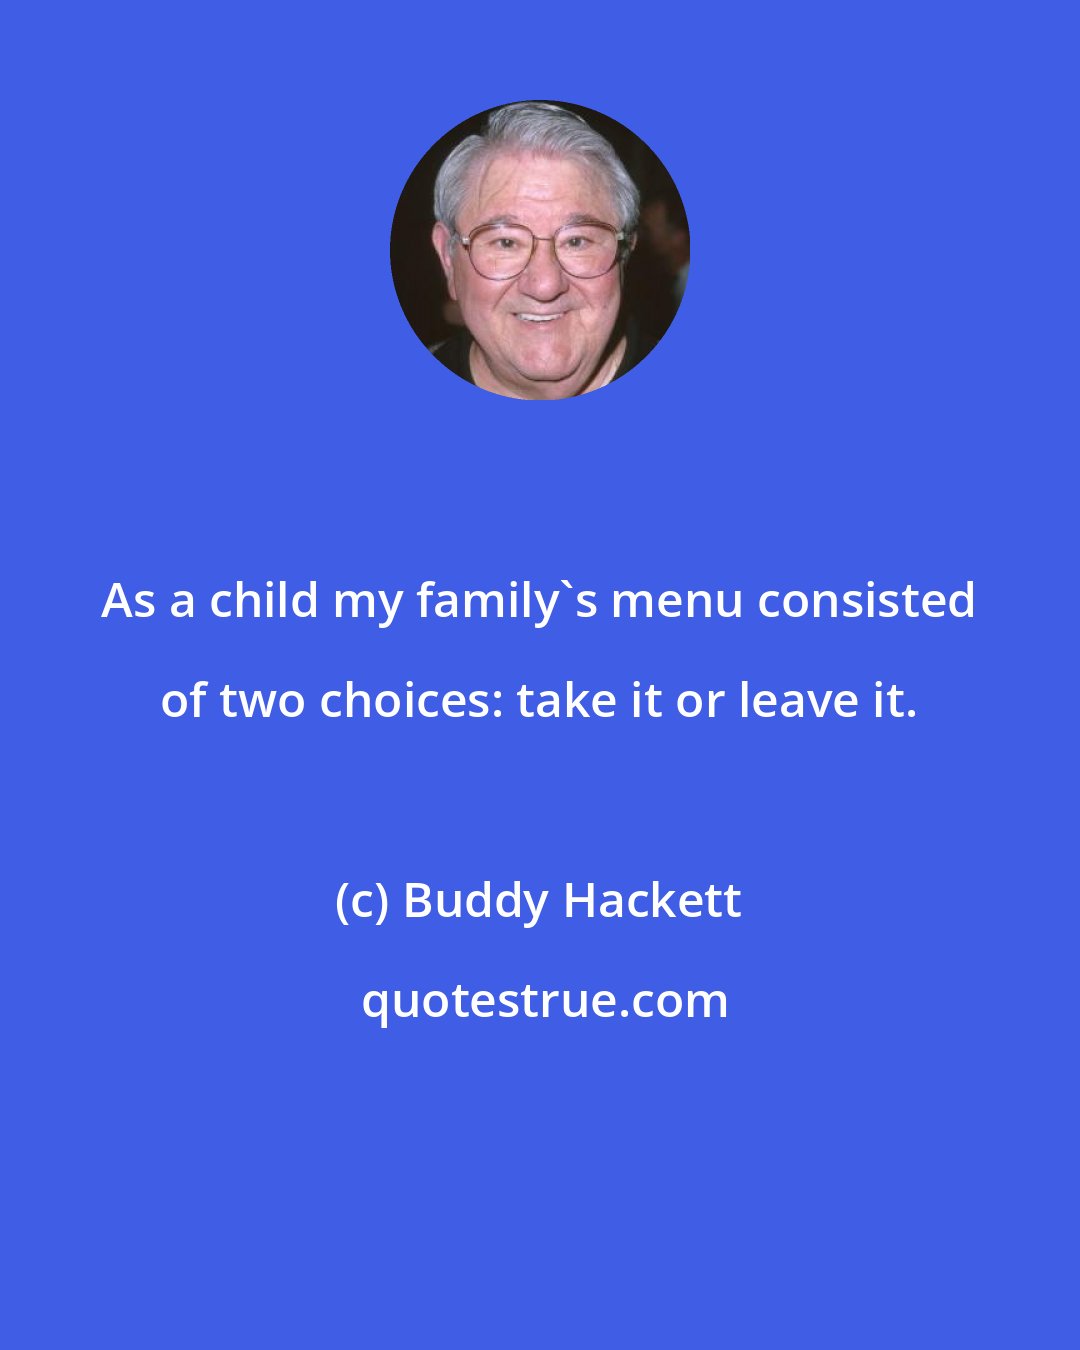 Buddy Hackett: As a child my family's menu consisted of two choices: take it or leave it.